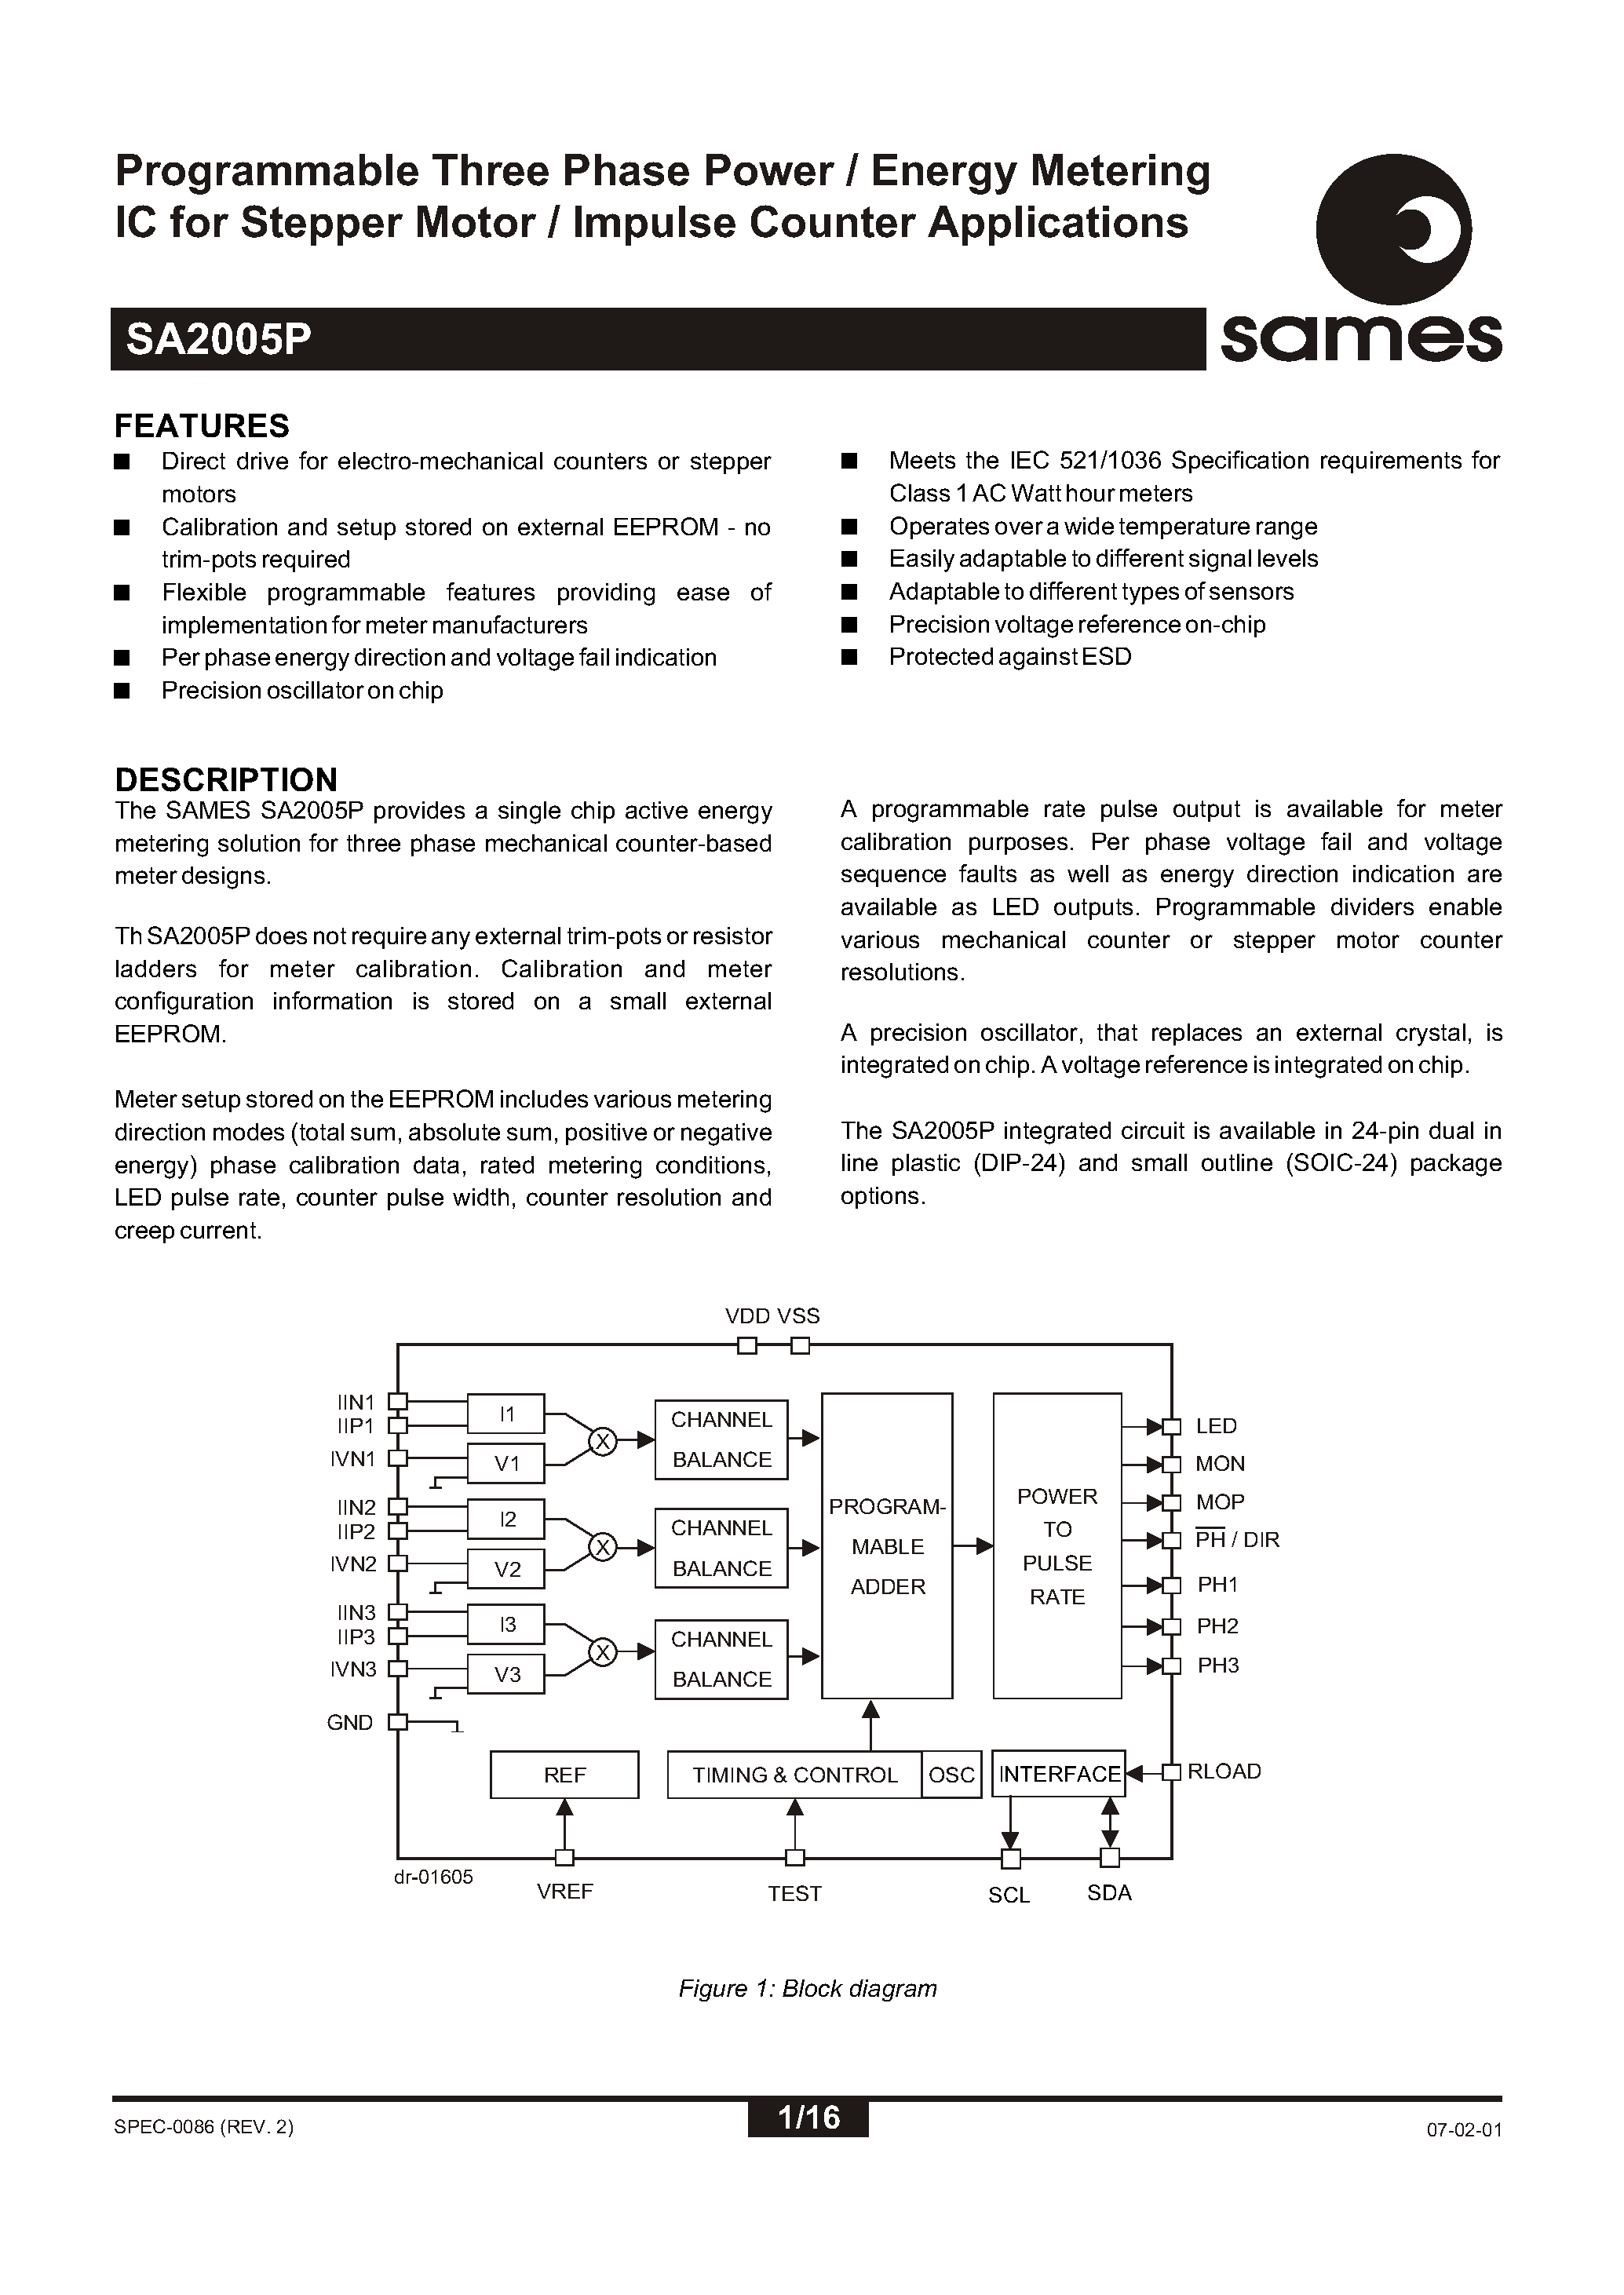 Datasheet SA2005PSA - Programmable Three Phase Power / Energy Metering IC for Stepper Motor / Impulse Counter Applications page 1